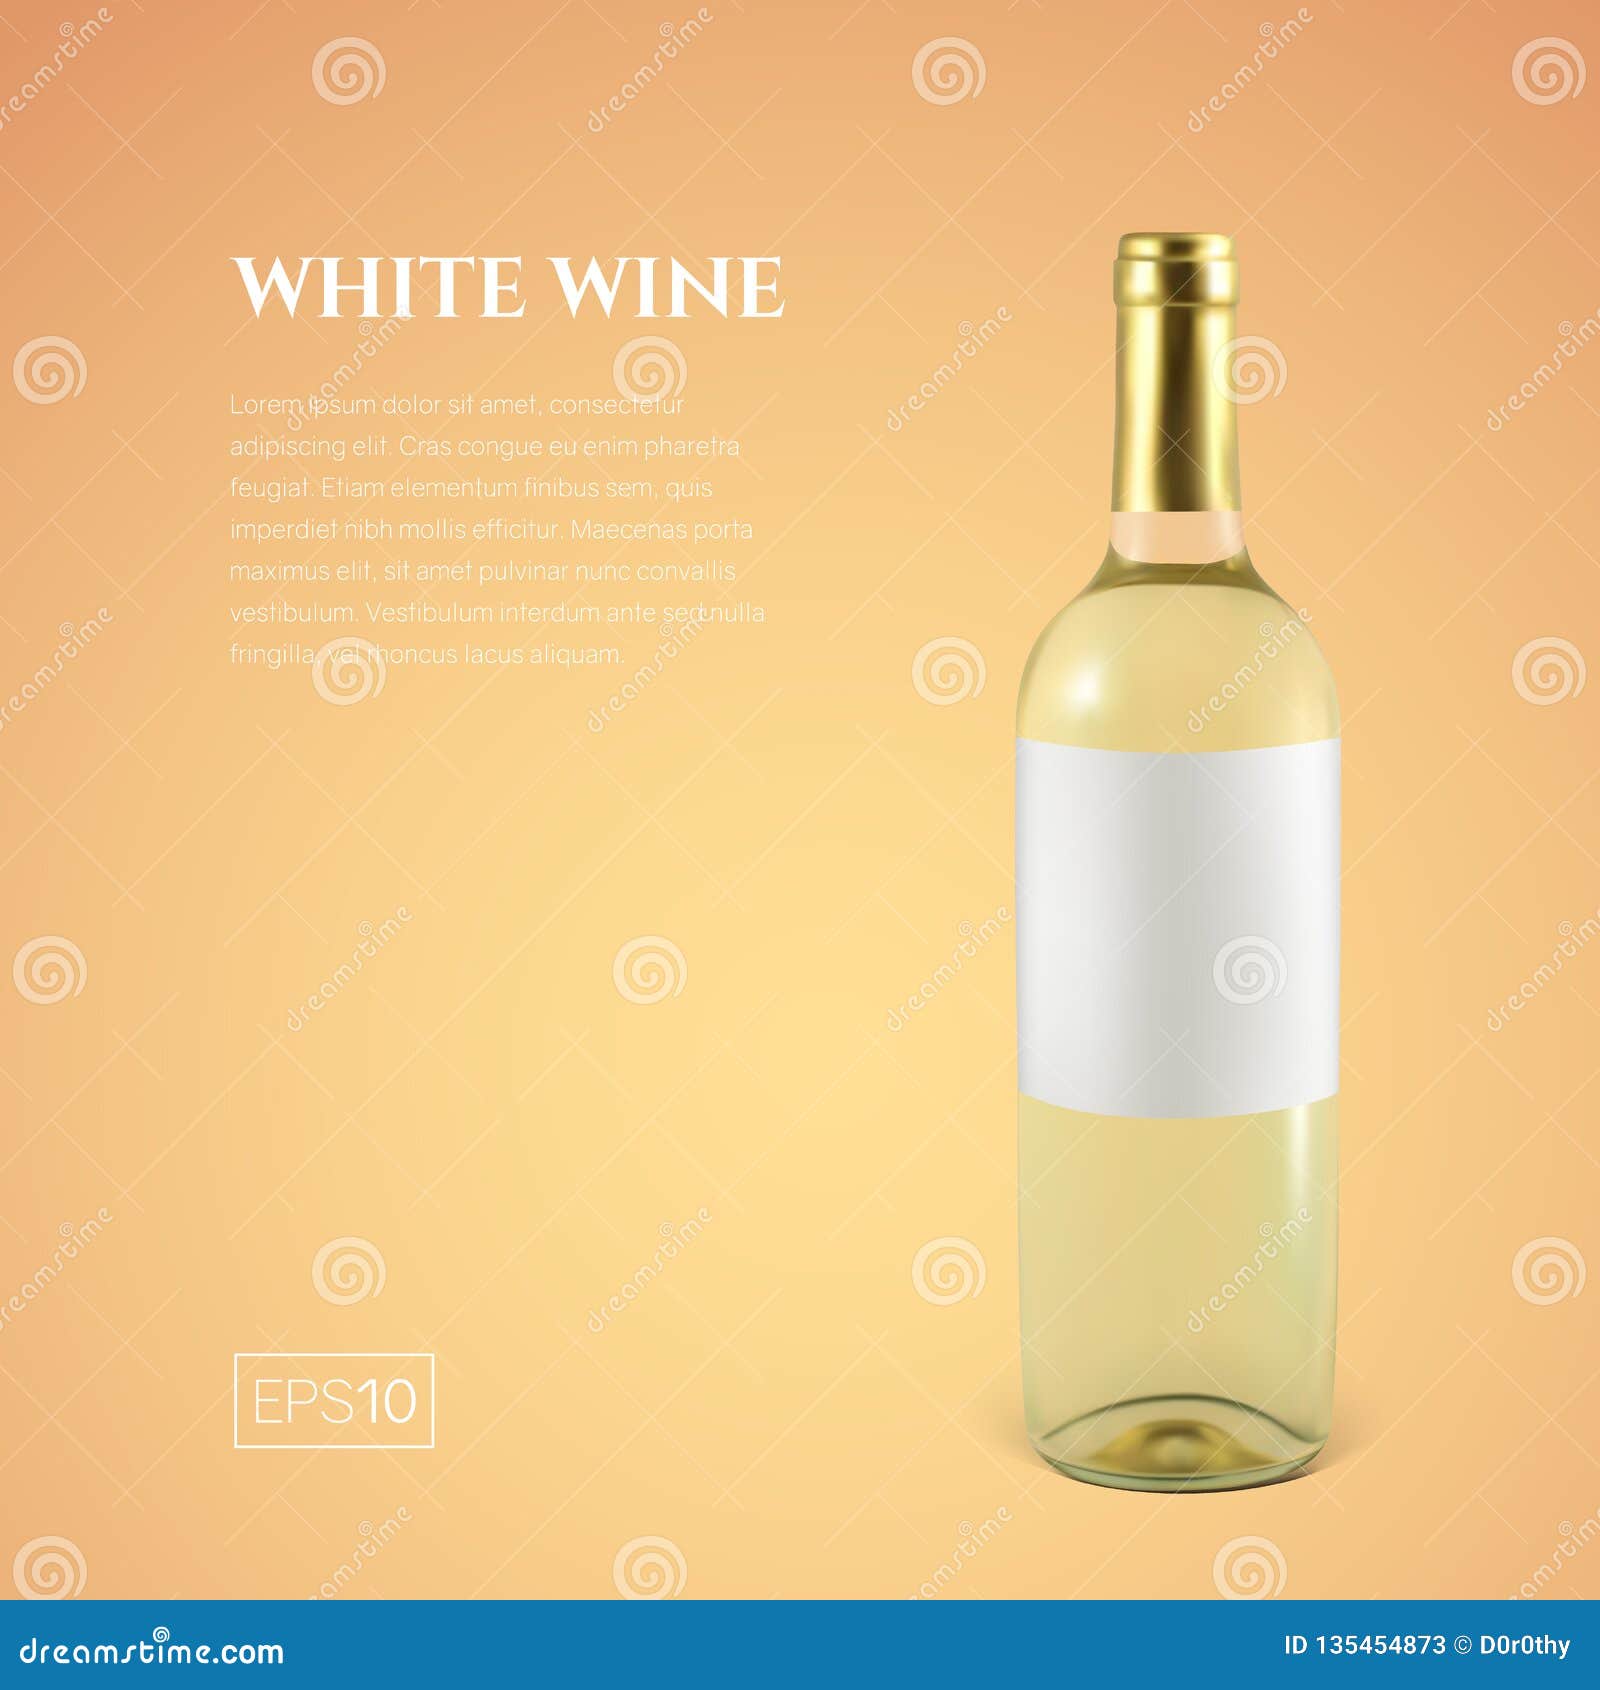 Download Photorealistic Bottle Of White Wine On A Yellow Background Stock Vector Illustration Of Bottle Color 135454873 Yellowimages Mockups